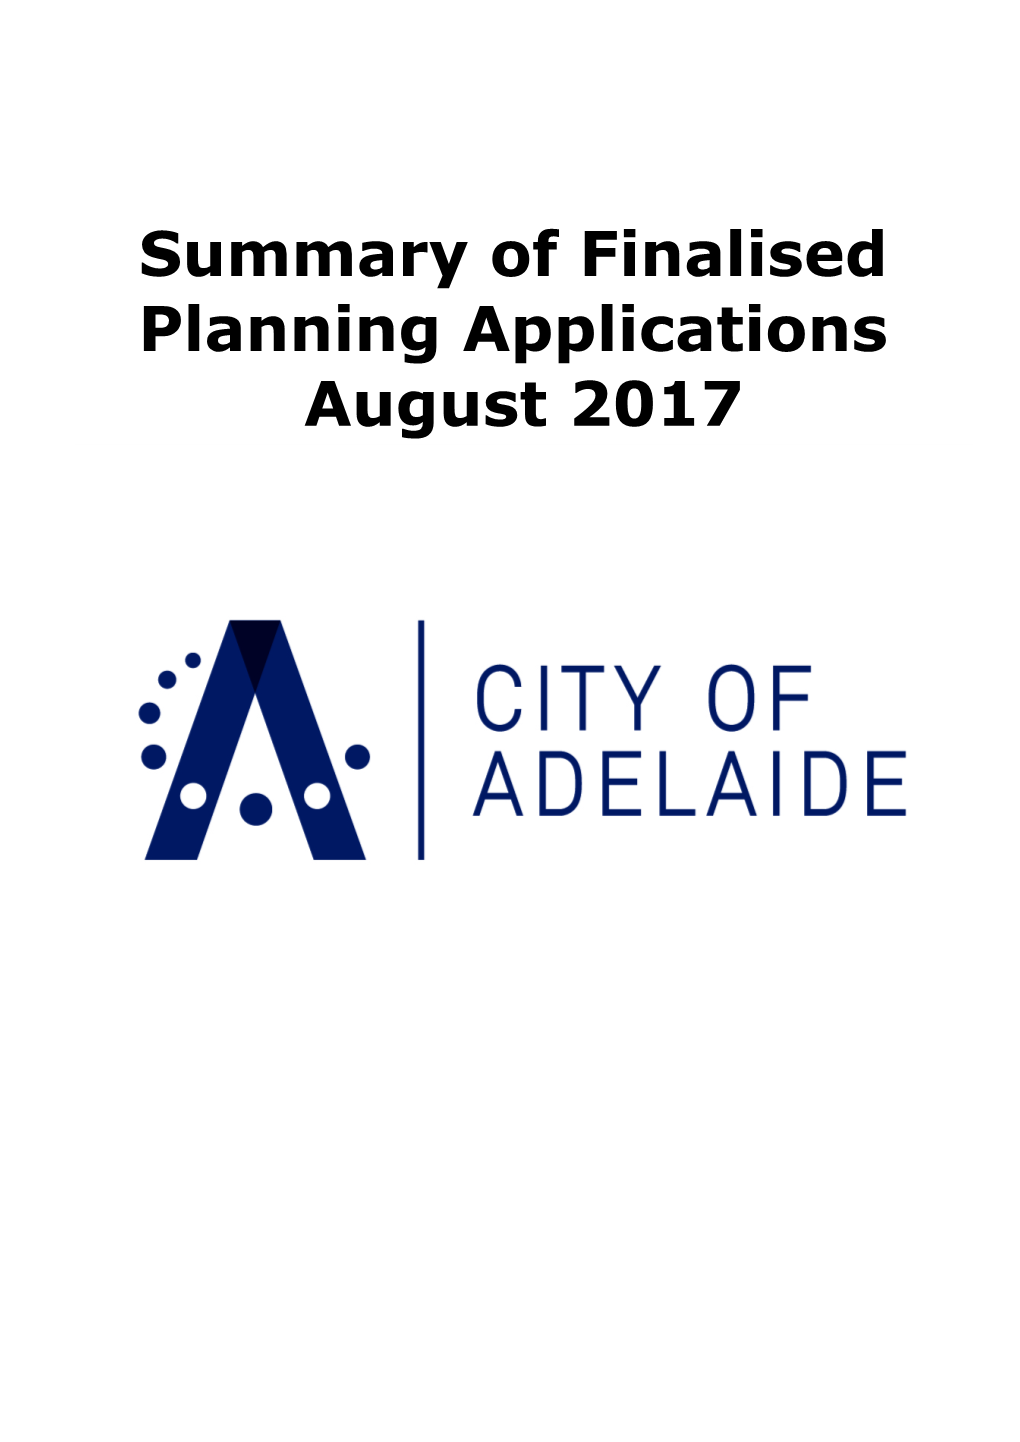 Summary of Finalised Planning Applications August 2017 Summary of Finalised Planning Applications August 2017